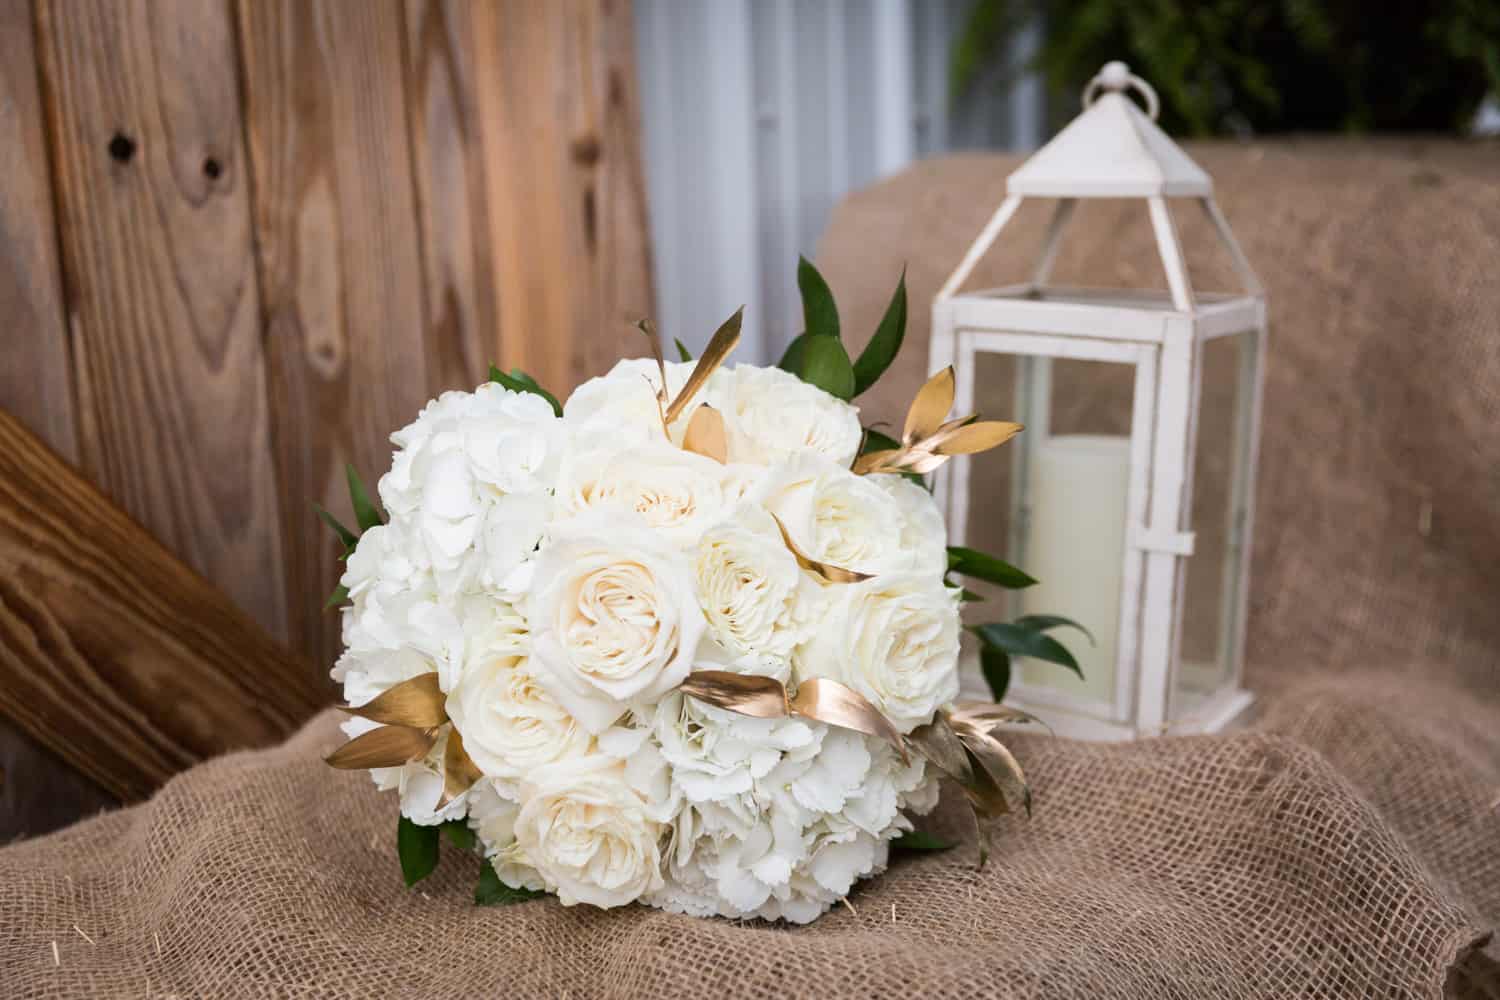 Bridal bouquet of white roses for an article on wedding cost cutting tips